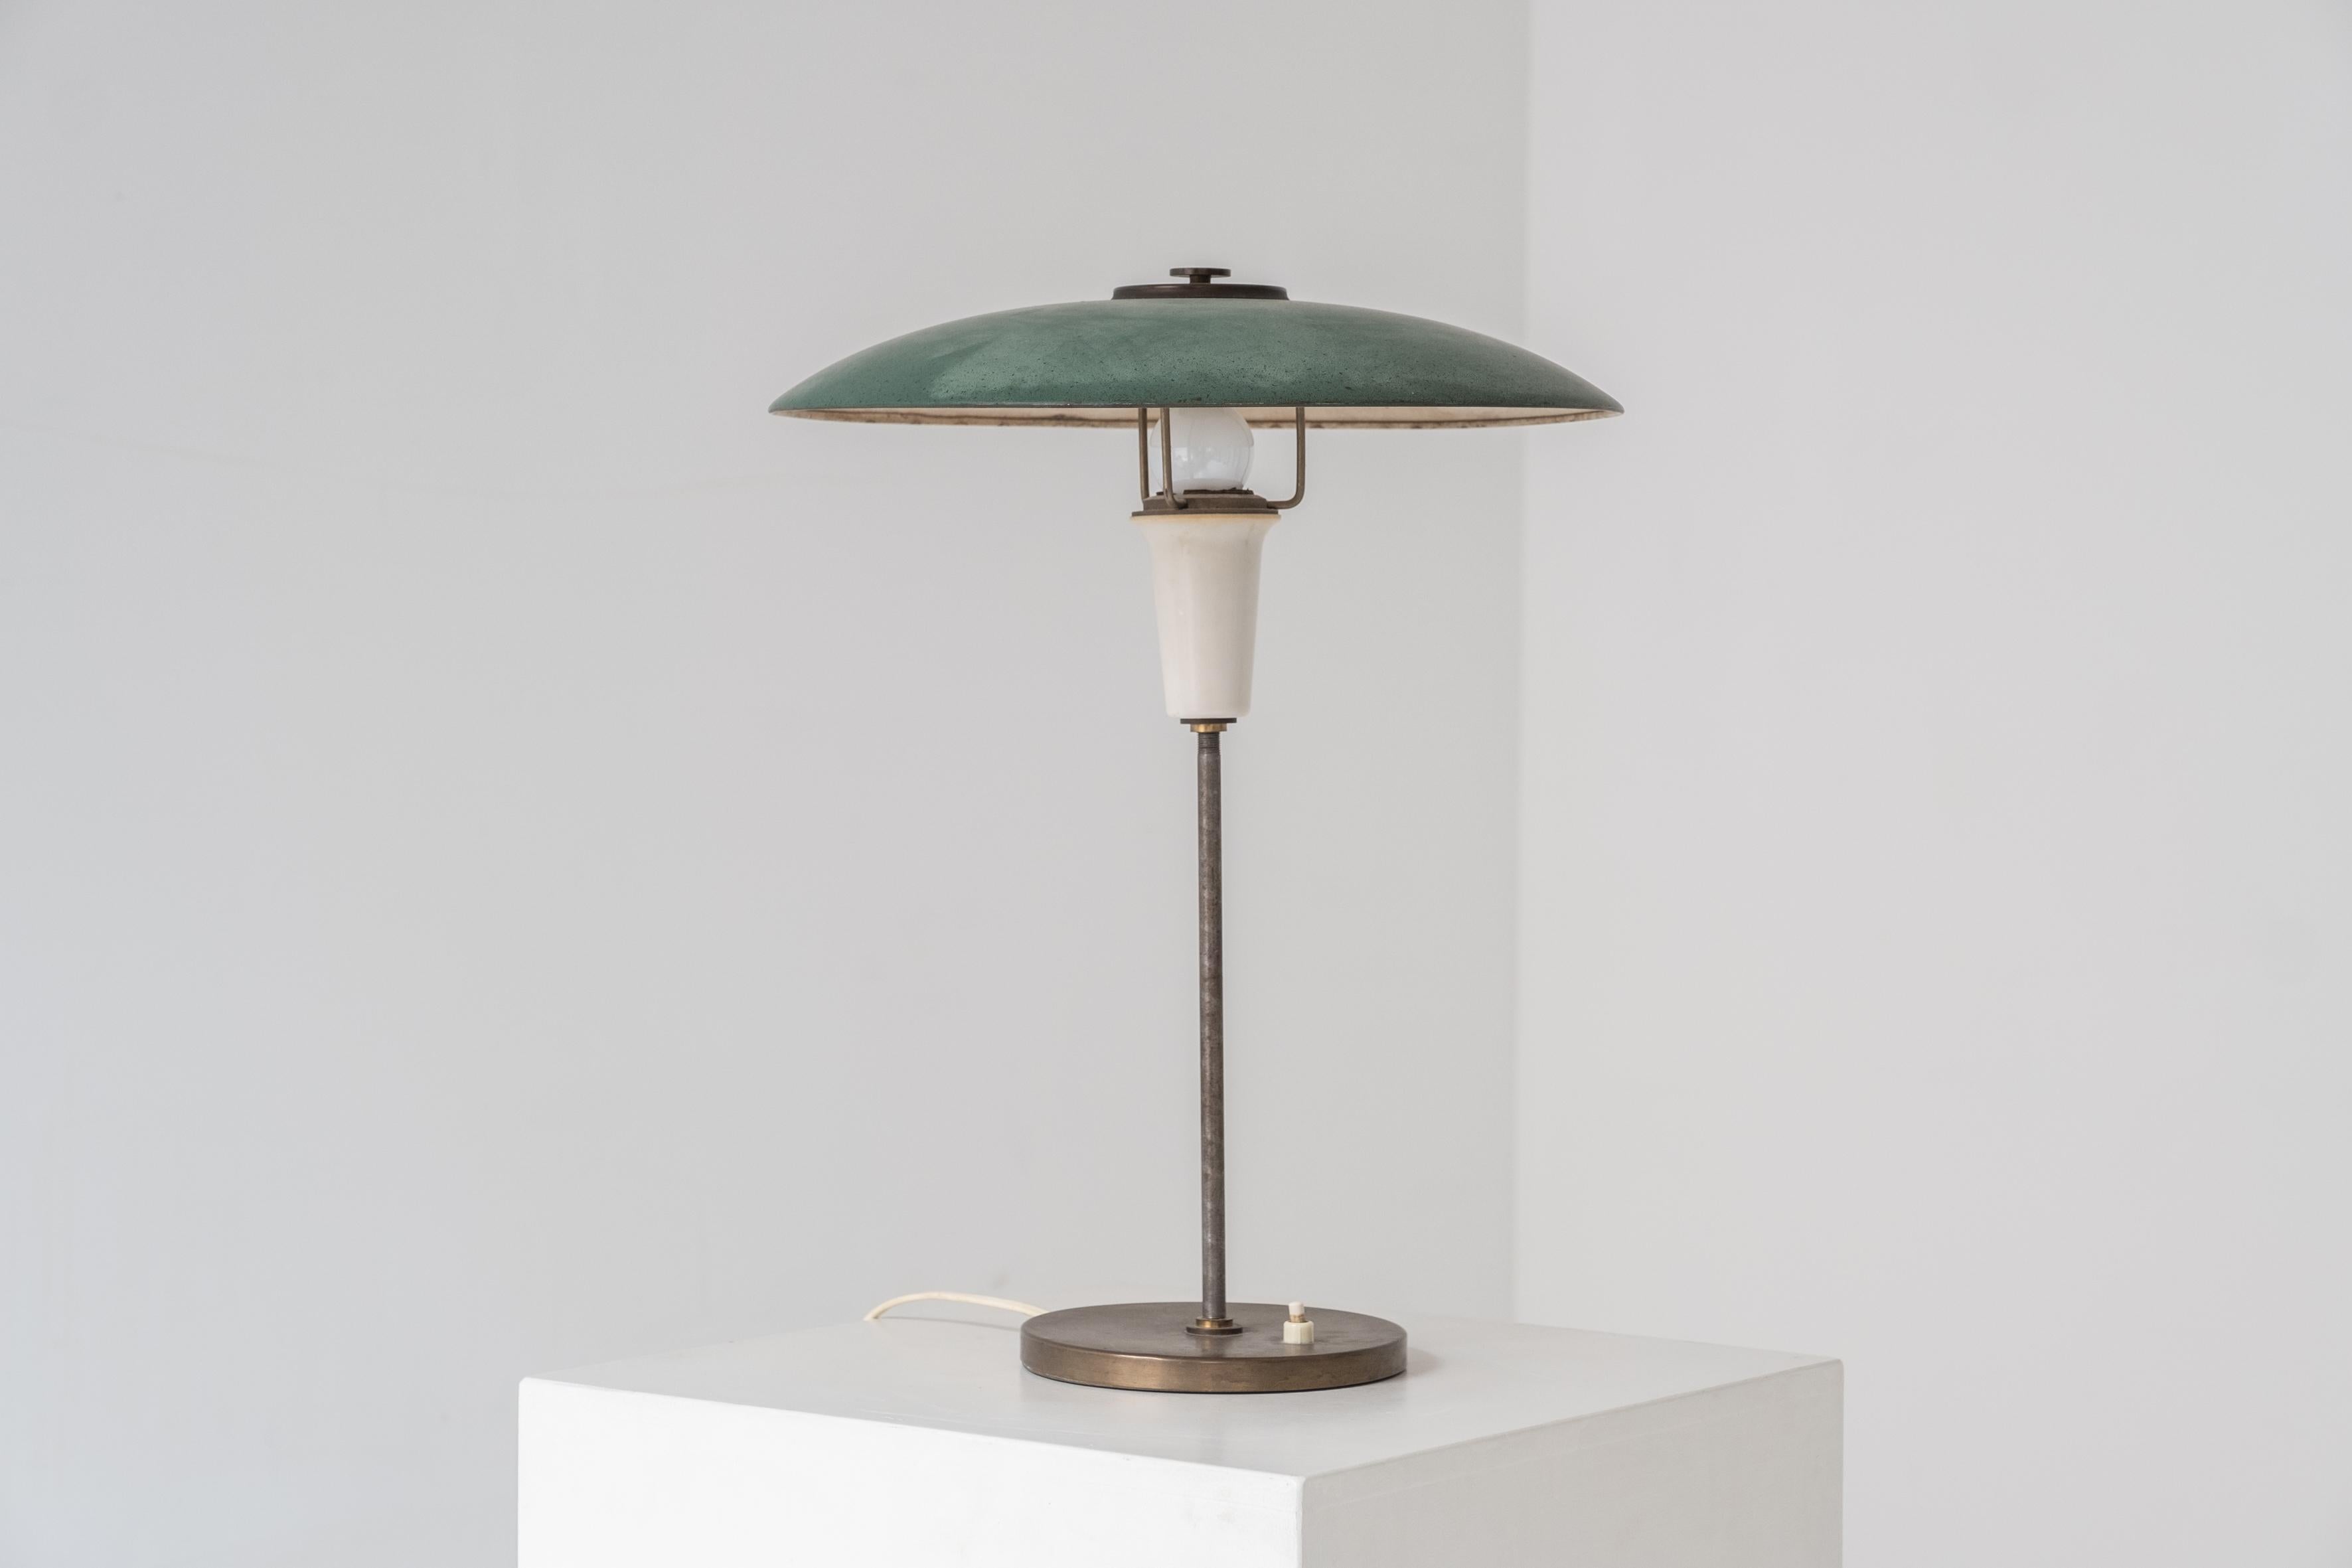 Lovely table lamp from Denmark, designed and manufactured during the 1960s. This table lamp is made out of metal and features a beautiful overall patina especially on the green shade. Classic Danish Modern.